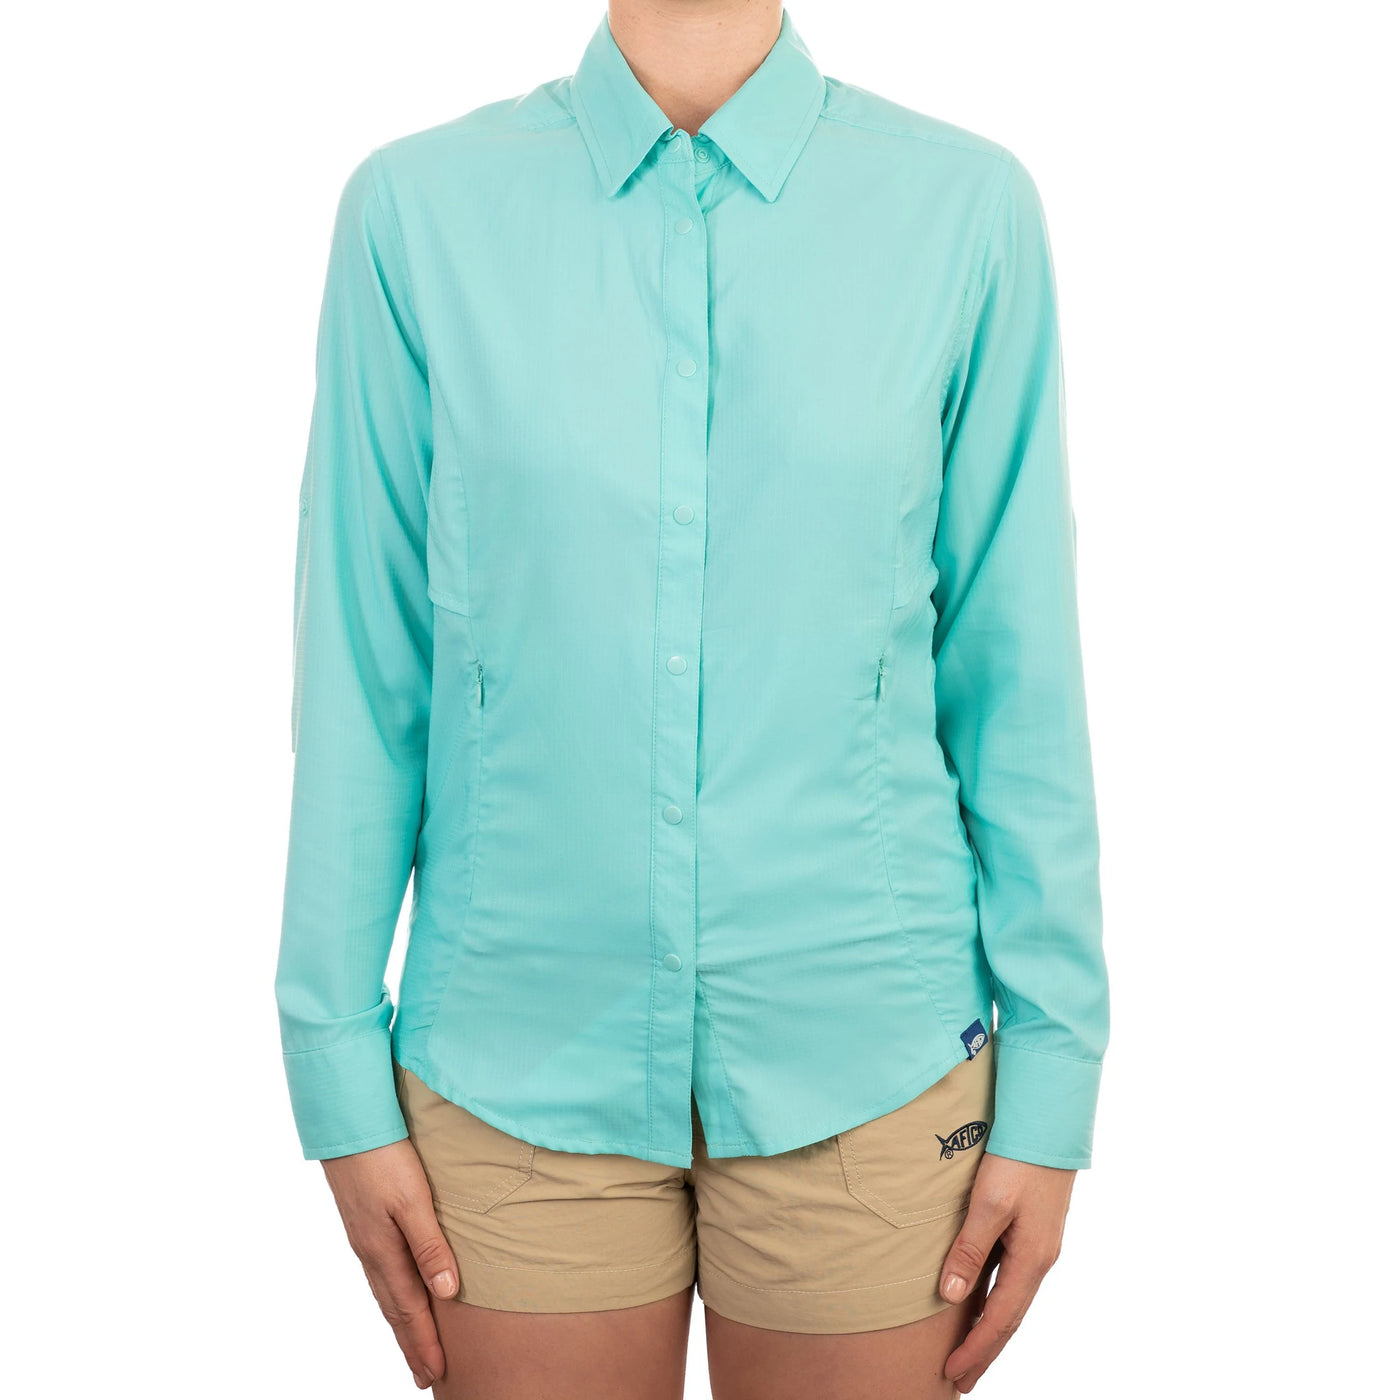 Aftco Women's Wrangle L/S Technical Fishing Shirt-WOMENS CLOTHING-Kevin's Fine Outdoor Gear & Apparel